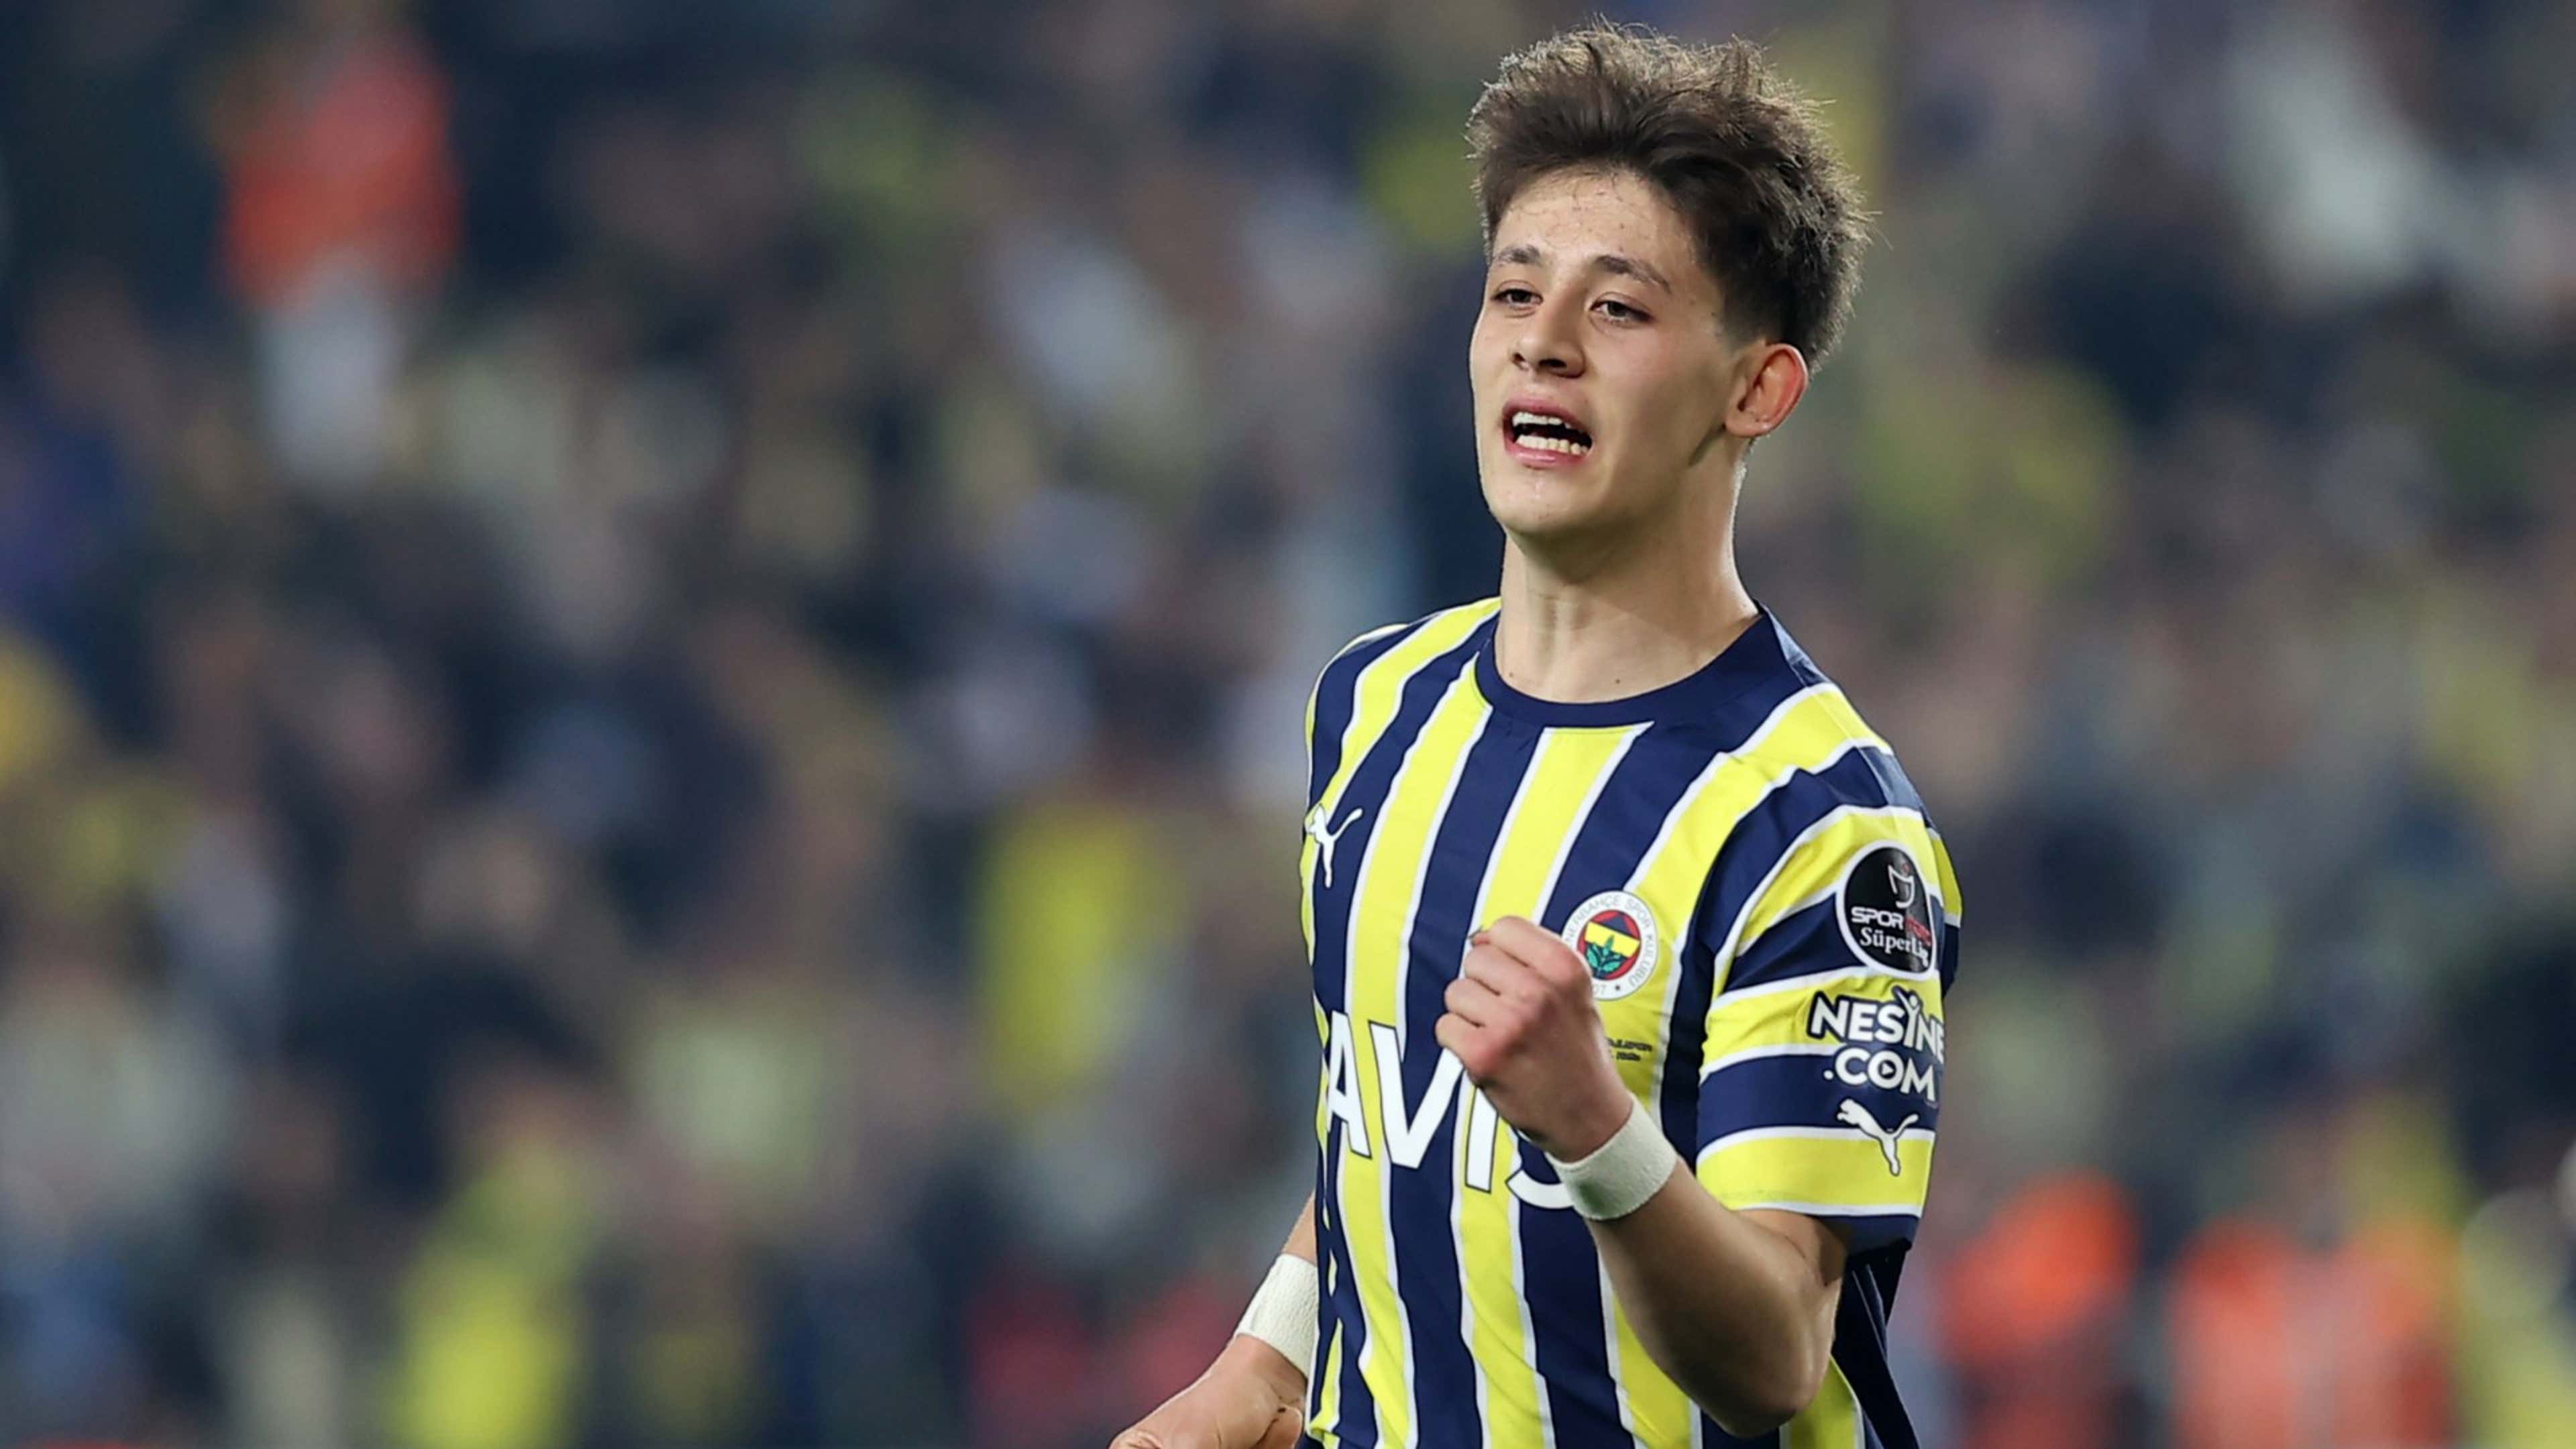 Fenerbahçe youngster Arda Güler rules out Real Madrid move